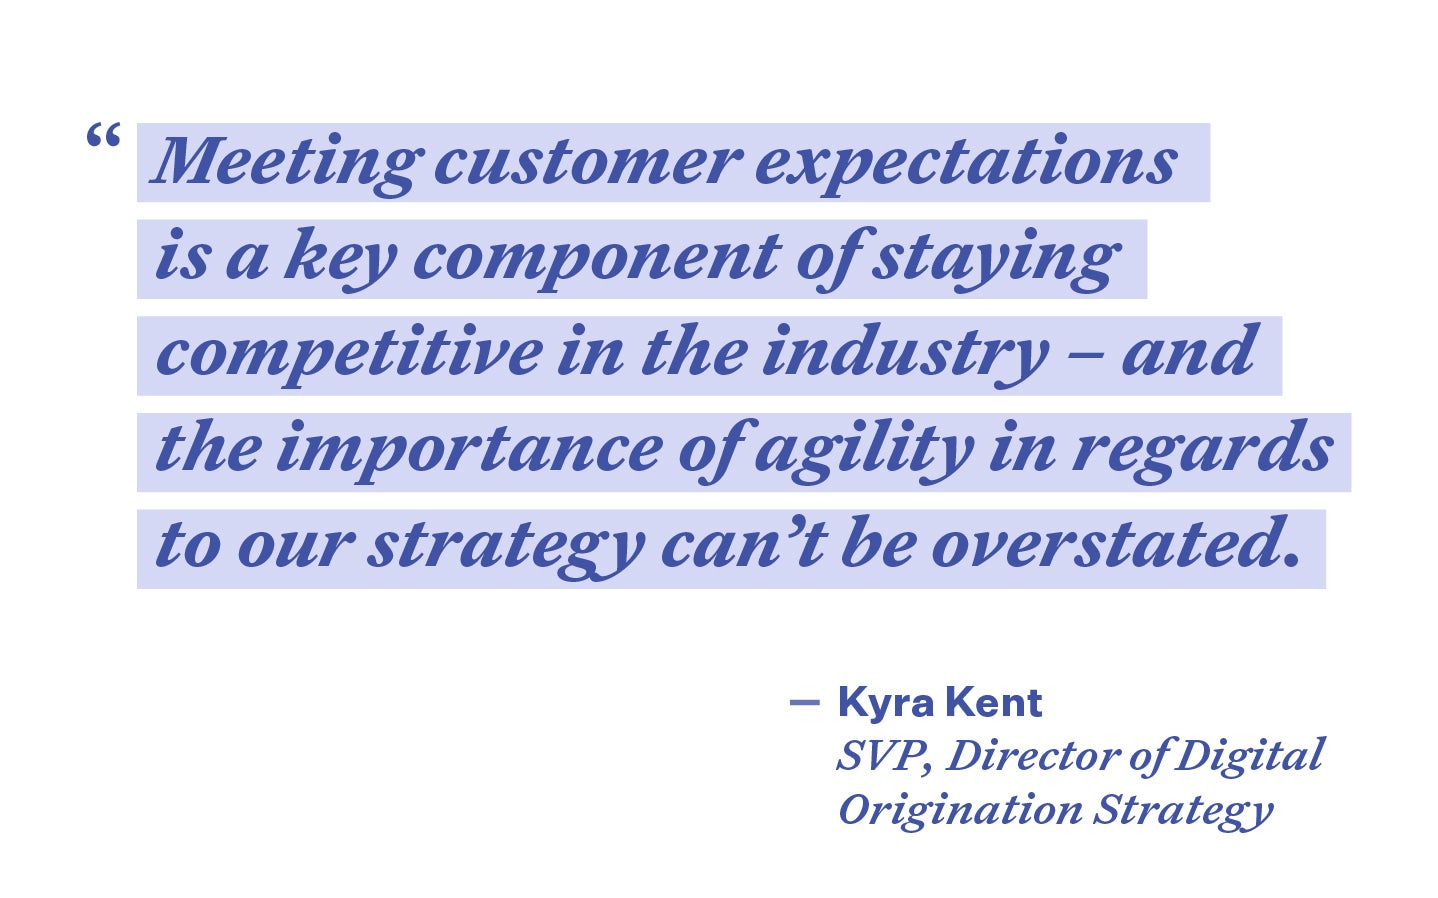 Quote that reads “Meeting customer expectations is a key component of staying competitive in the industry – and the importance of agility in regards to our strategy can’t be overstated.” Kyra Kent, SVP, Director of Digital Origination Strategy - Consumer